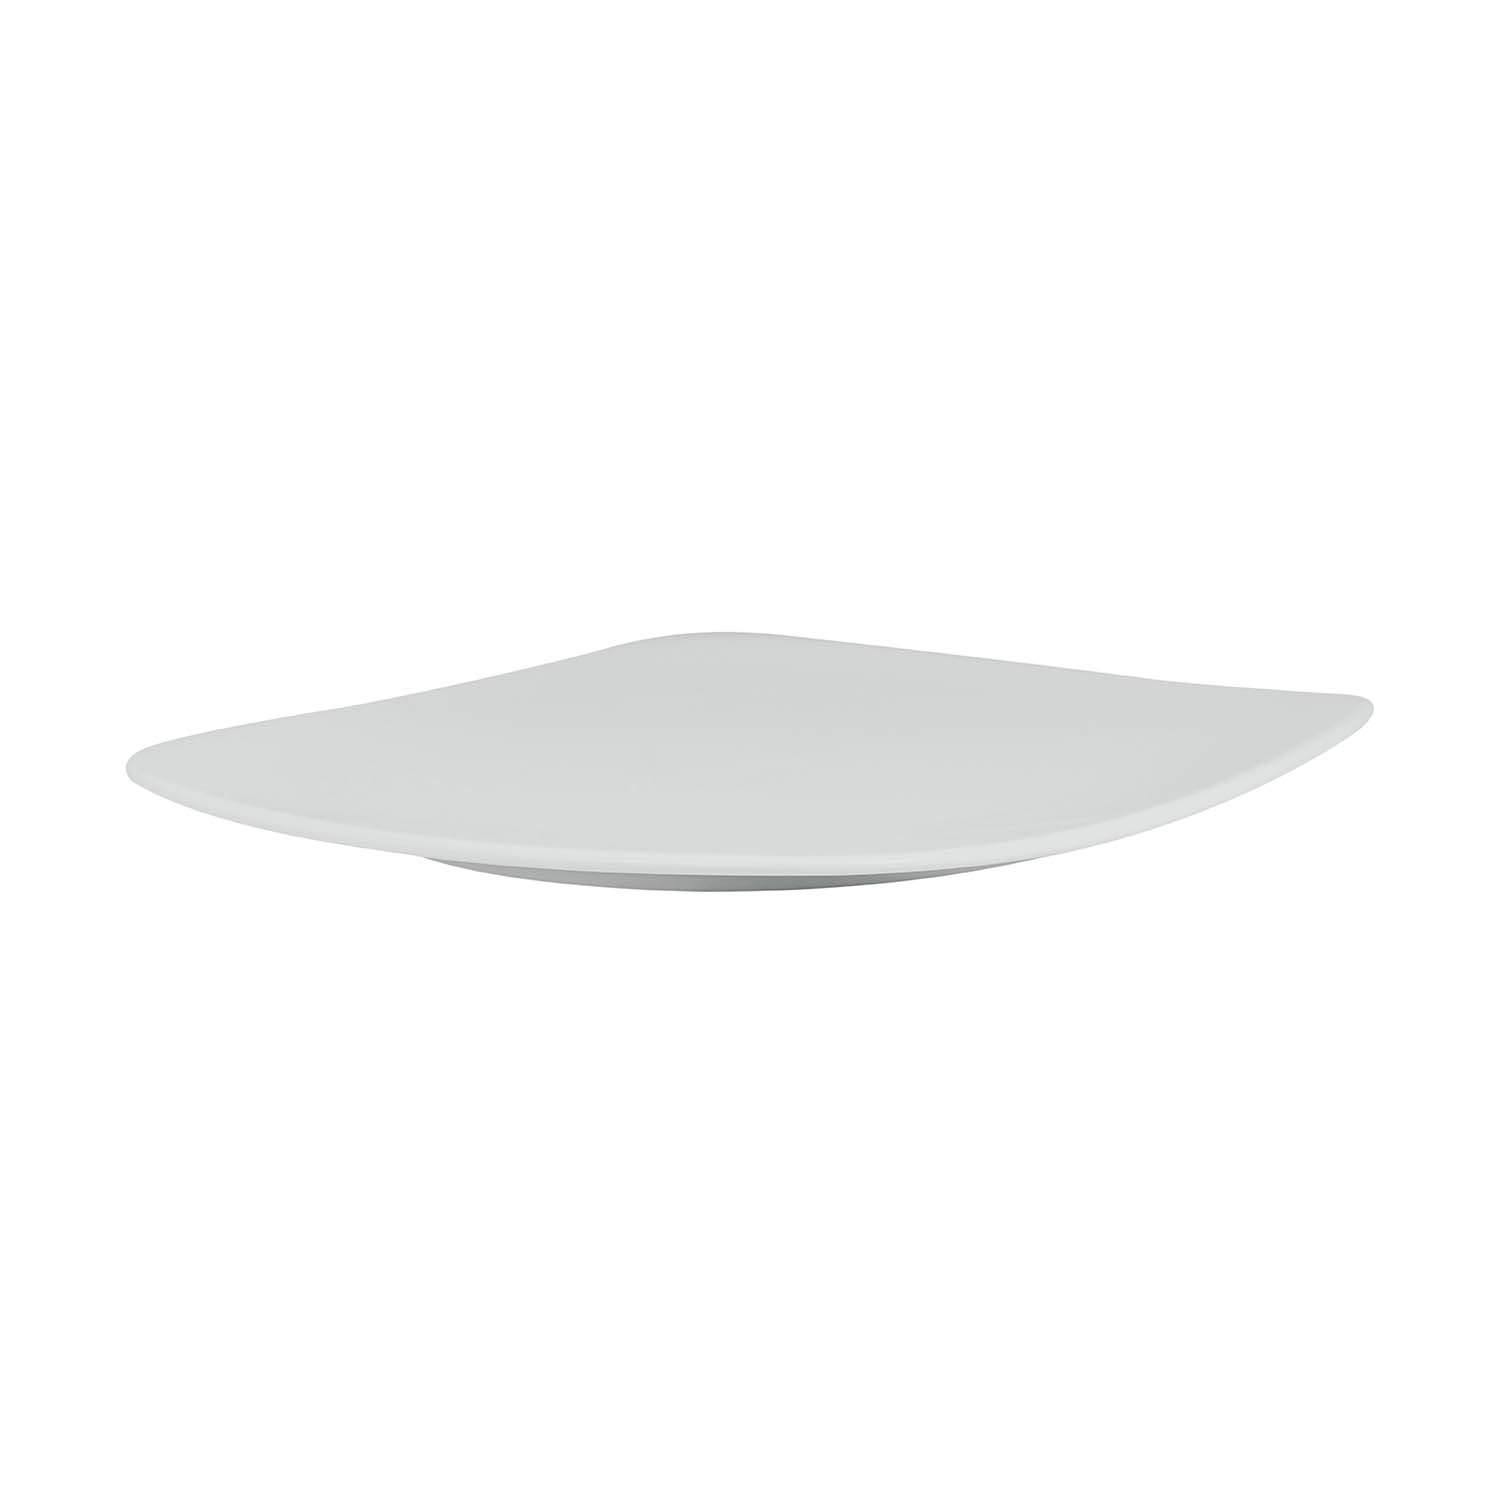 Baralee Simple Plus Square Plate